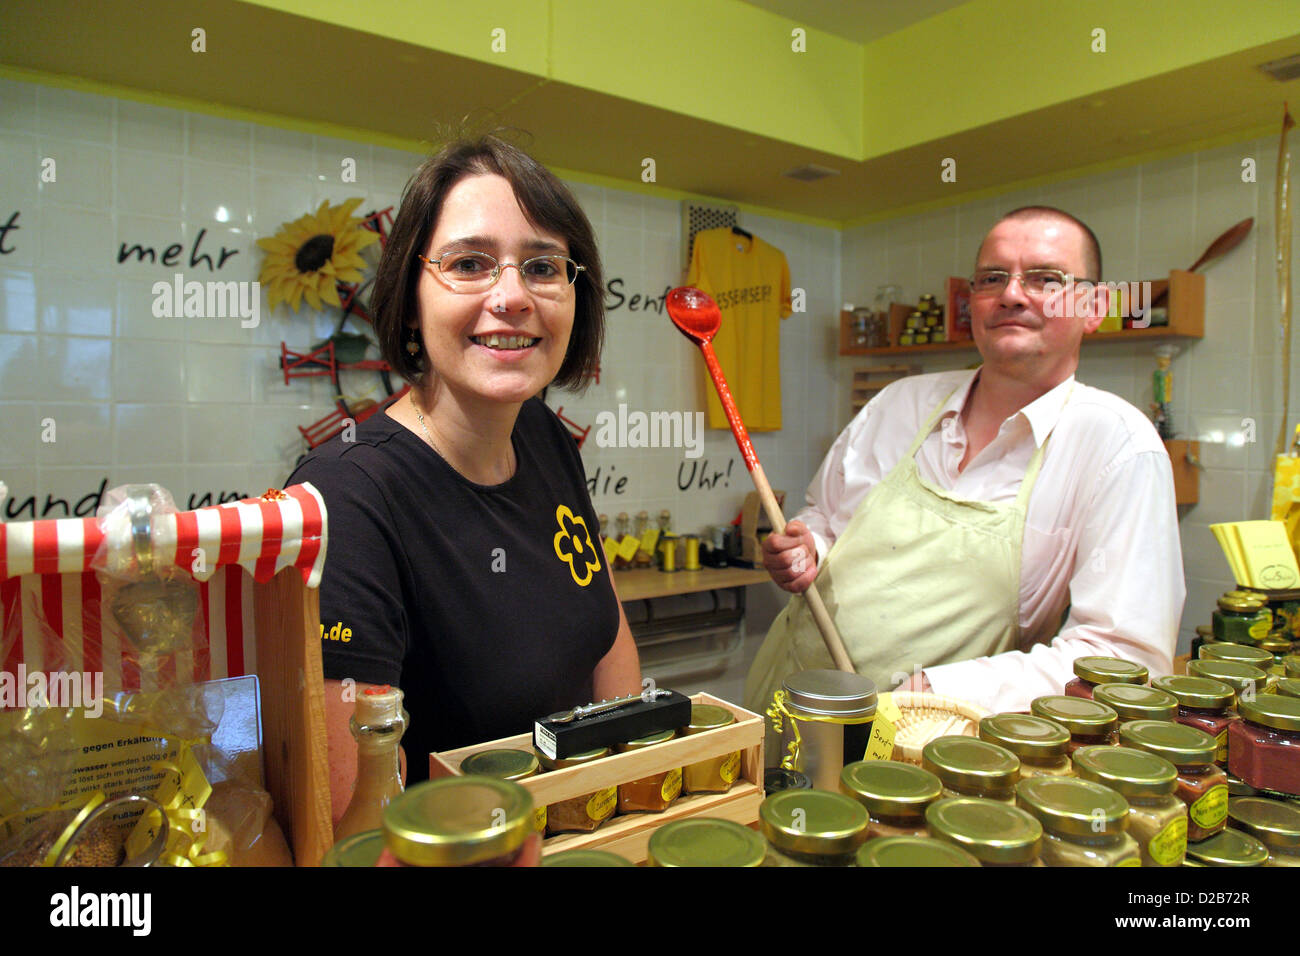 Berlin, Germany, and Christoph Merit Schambach, owner of Mustard salons Stock Photo